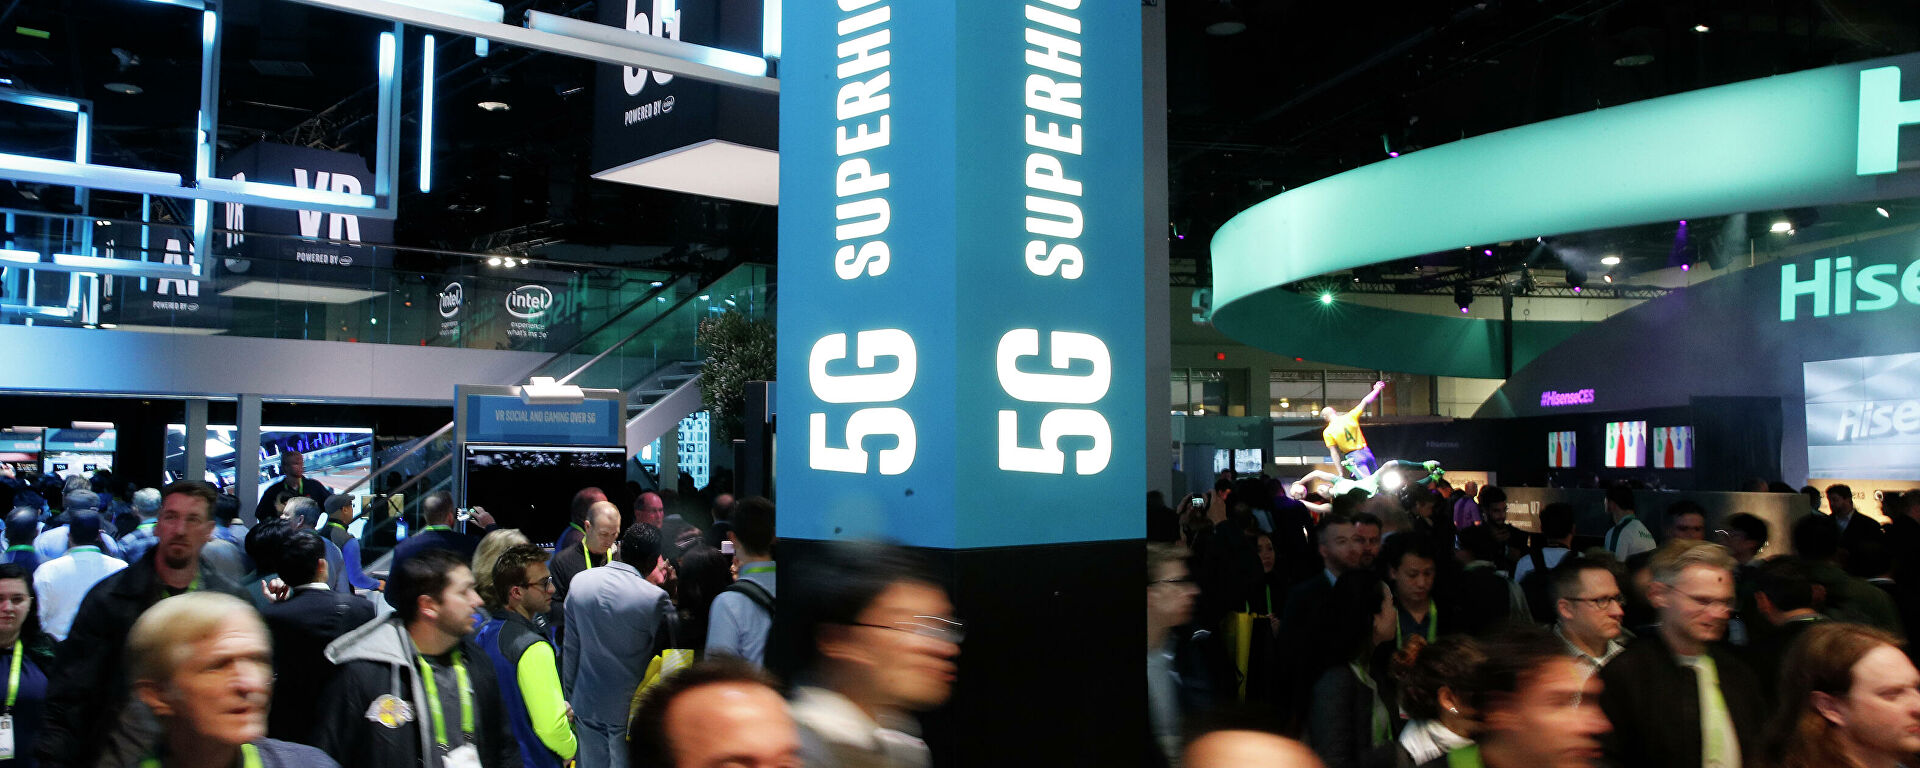 Las Vegas - Sputnik Brazil on January 9, 2018, 1920, during the International Consumer Electronics Exhibition held on 04.01.2022 Intel promotes a sign 5G devices at the booth.